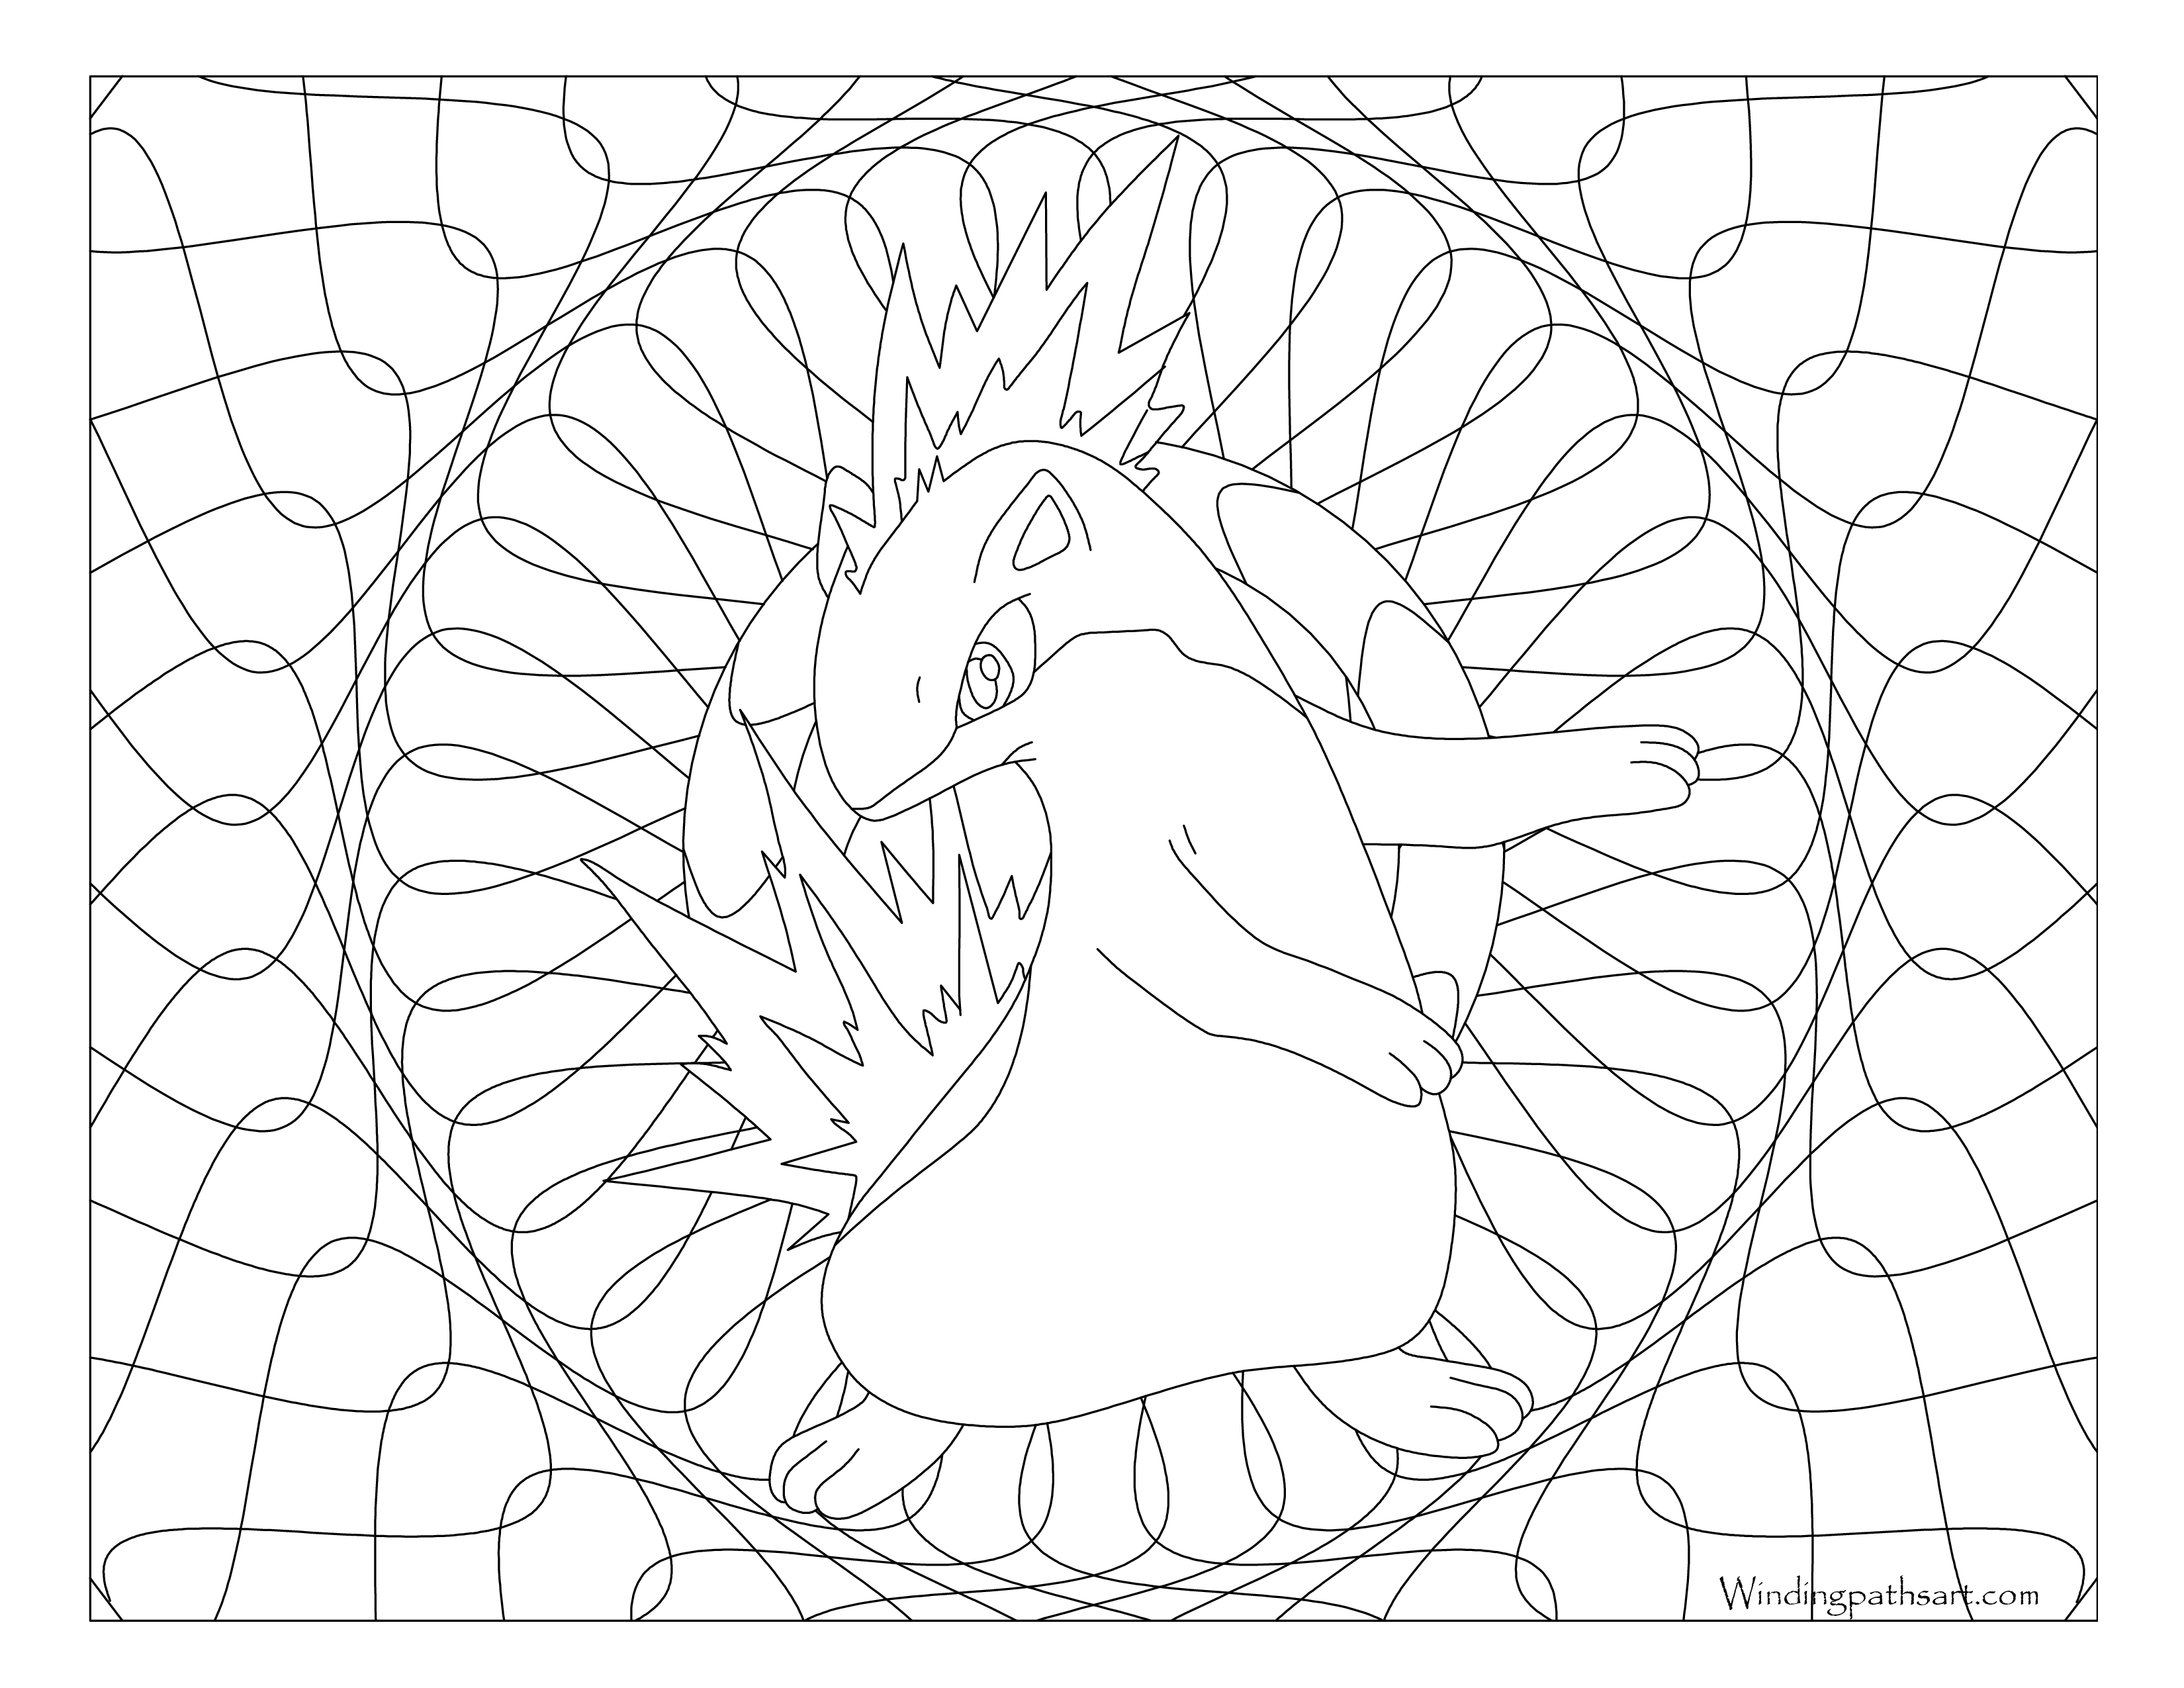 Quilava pokemon coloring page